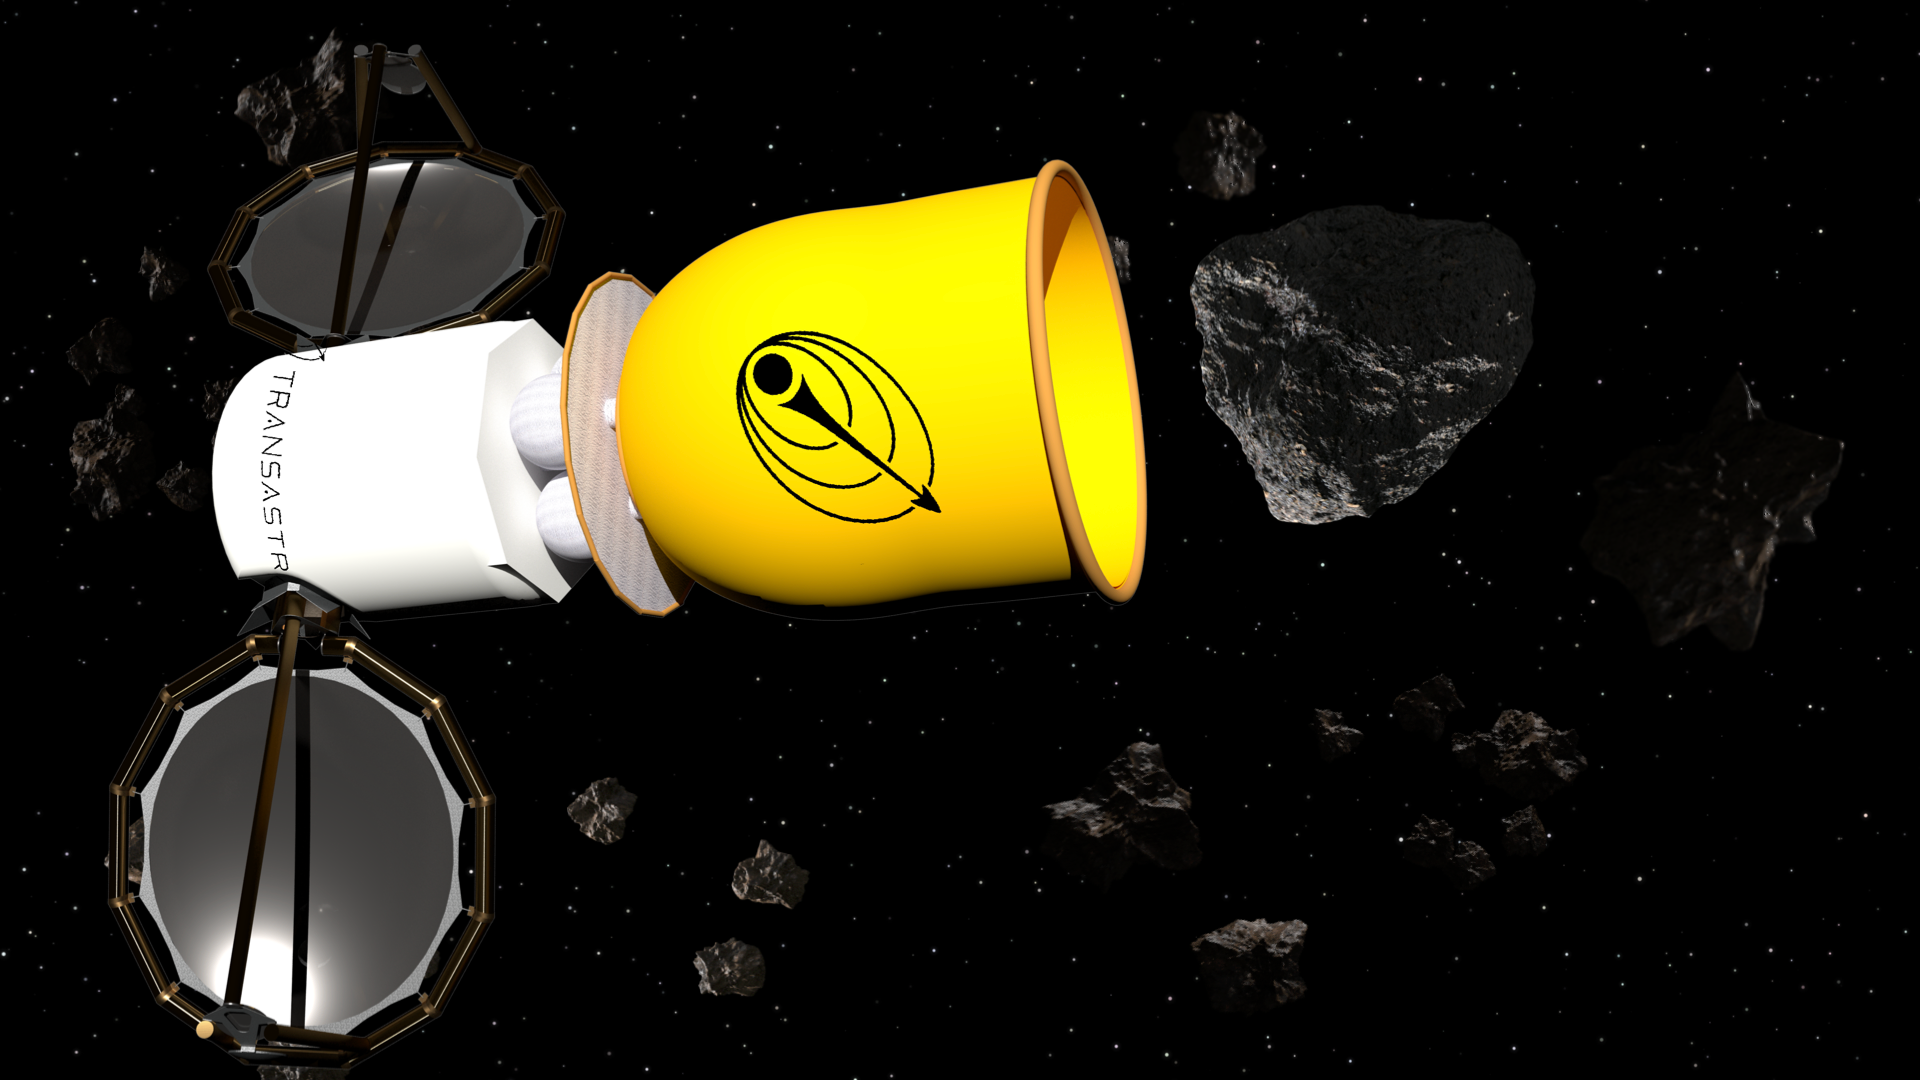 A conceptual illustration of a TransAstra Worker Bee aircraft on its first asteroid mining flight mission.